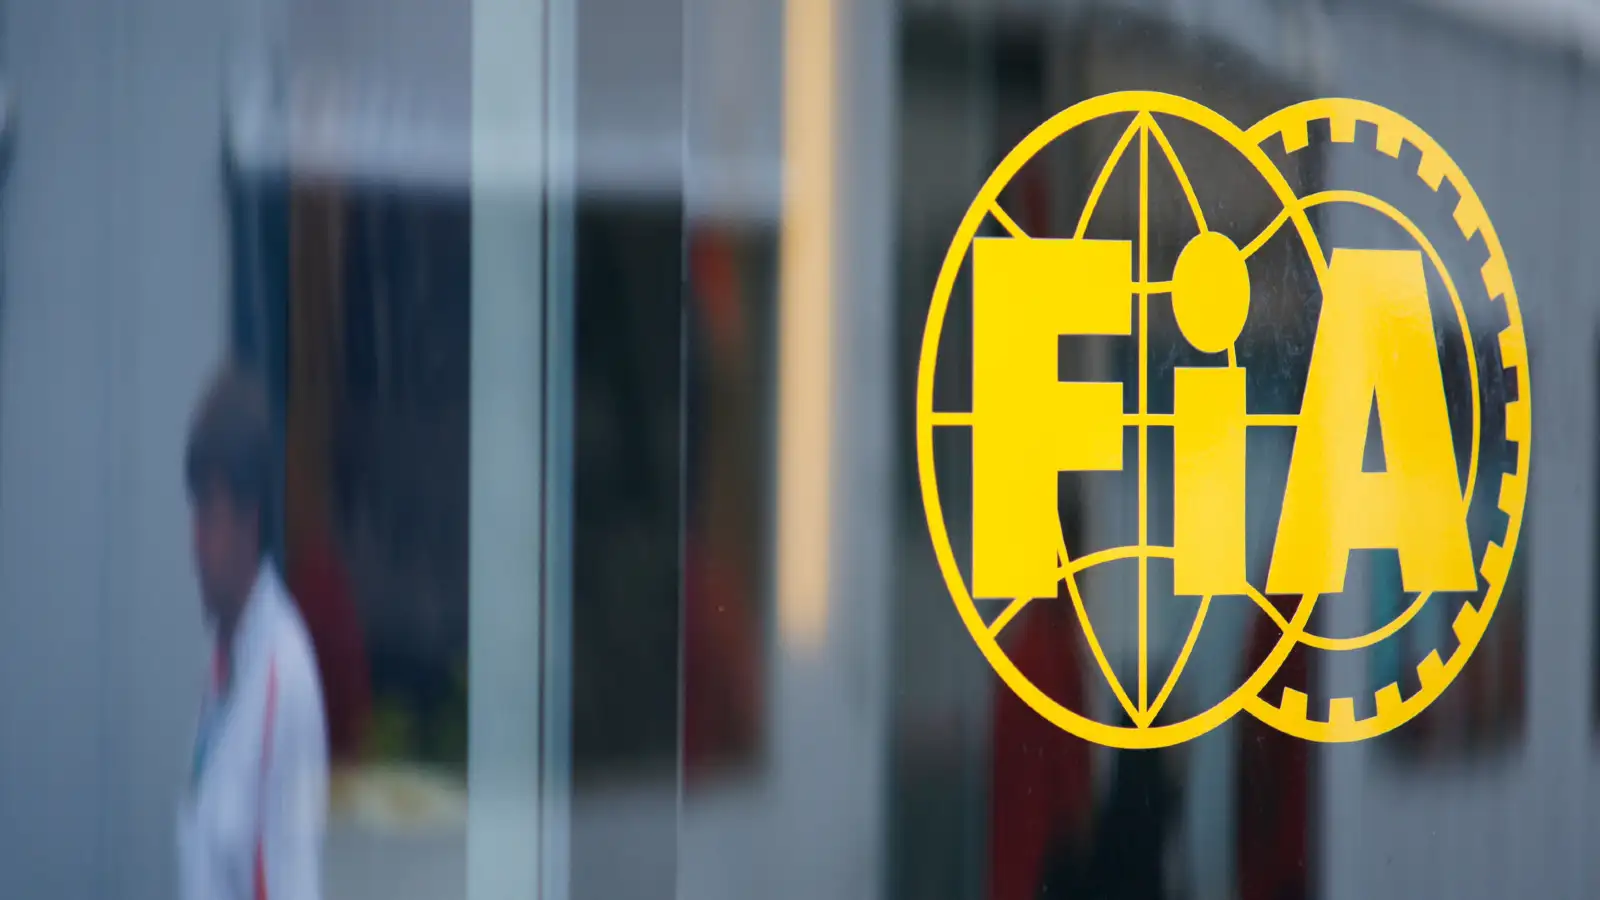 The FIA logo, as pictured on a motorhome.